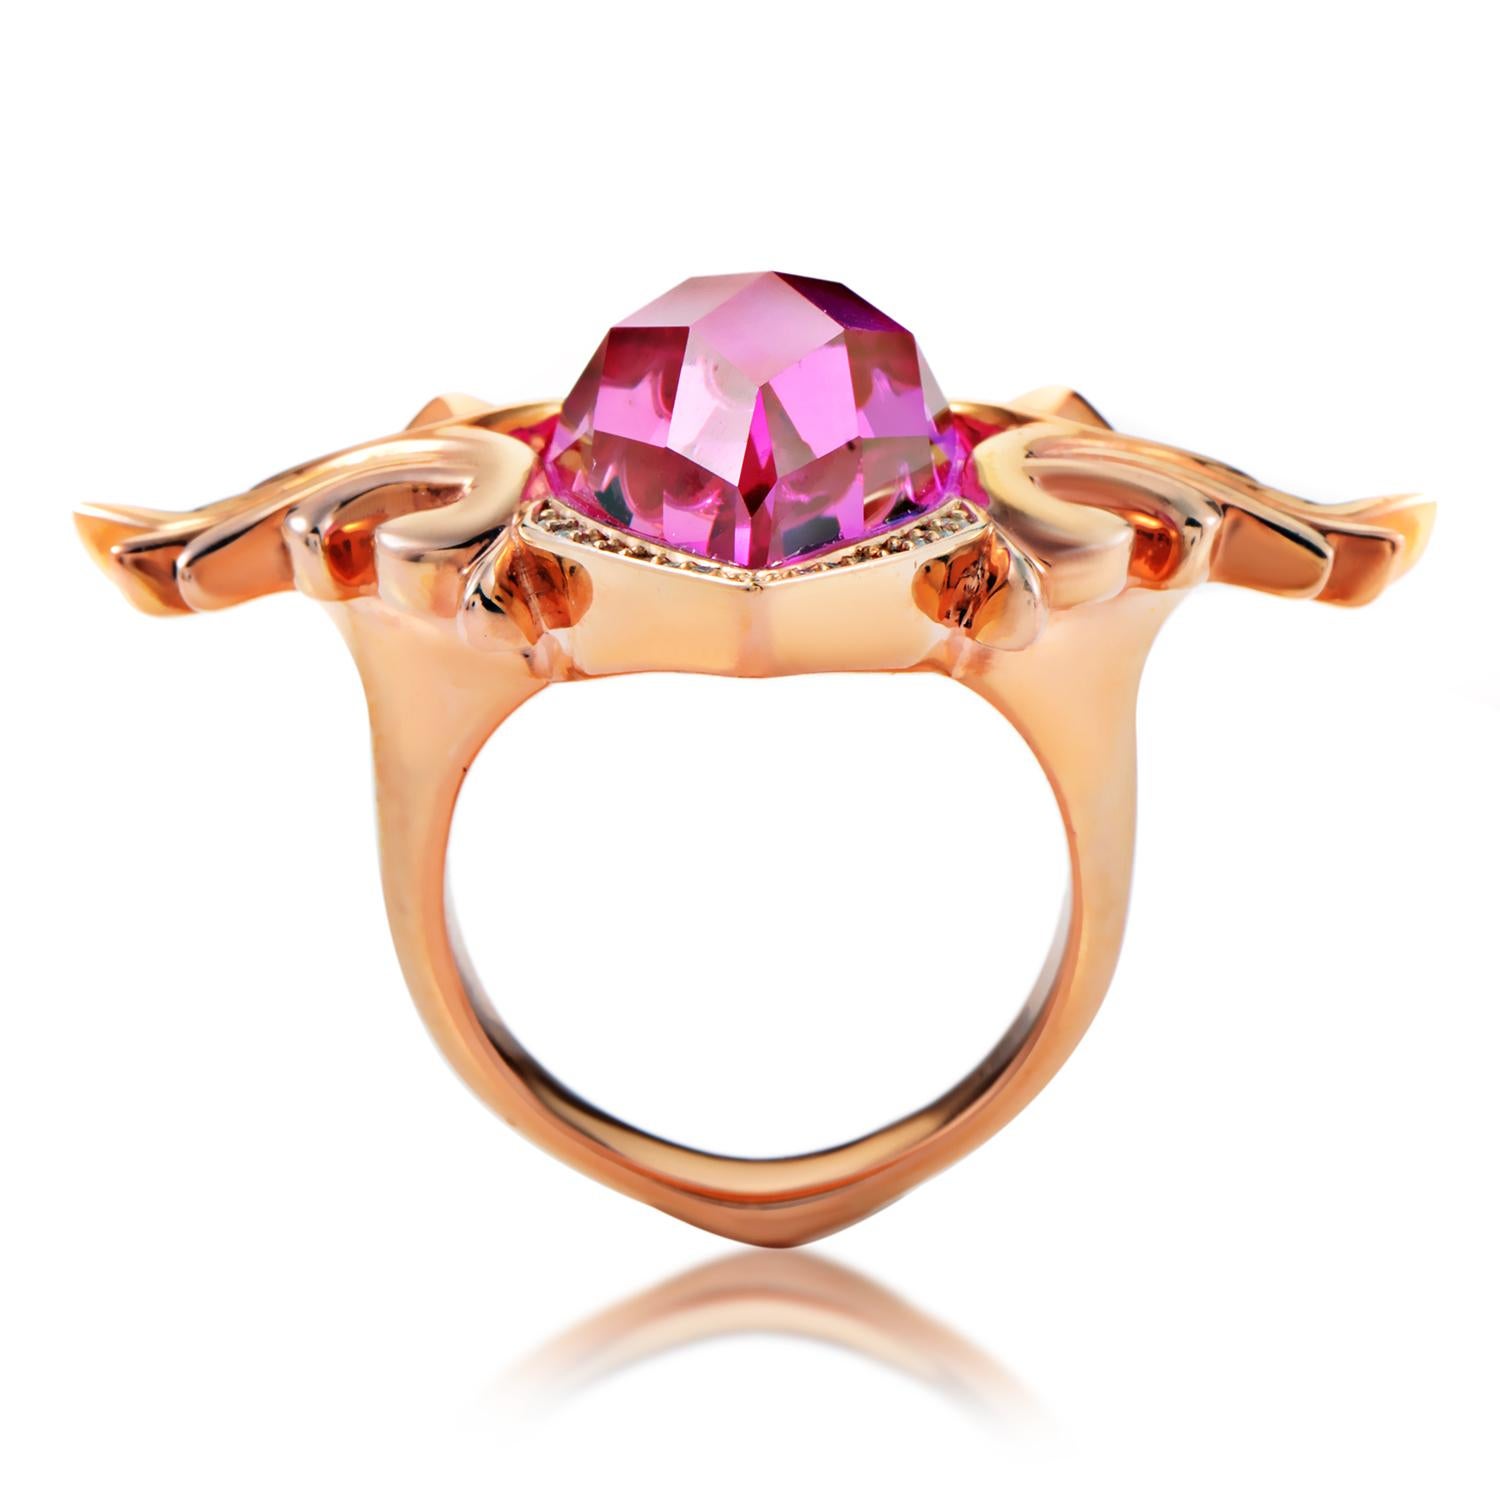 Awe-inspiring and splendidly feminine, this gorgeous ring boasts an endearingly intricate design that compels with its offbeat elements and harmonious overall tone. The ring is made of rose gold-plated sterling silver that sets the lovely tone for